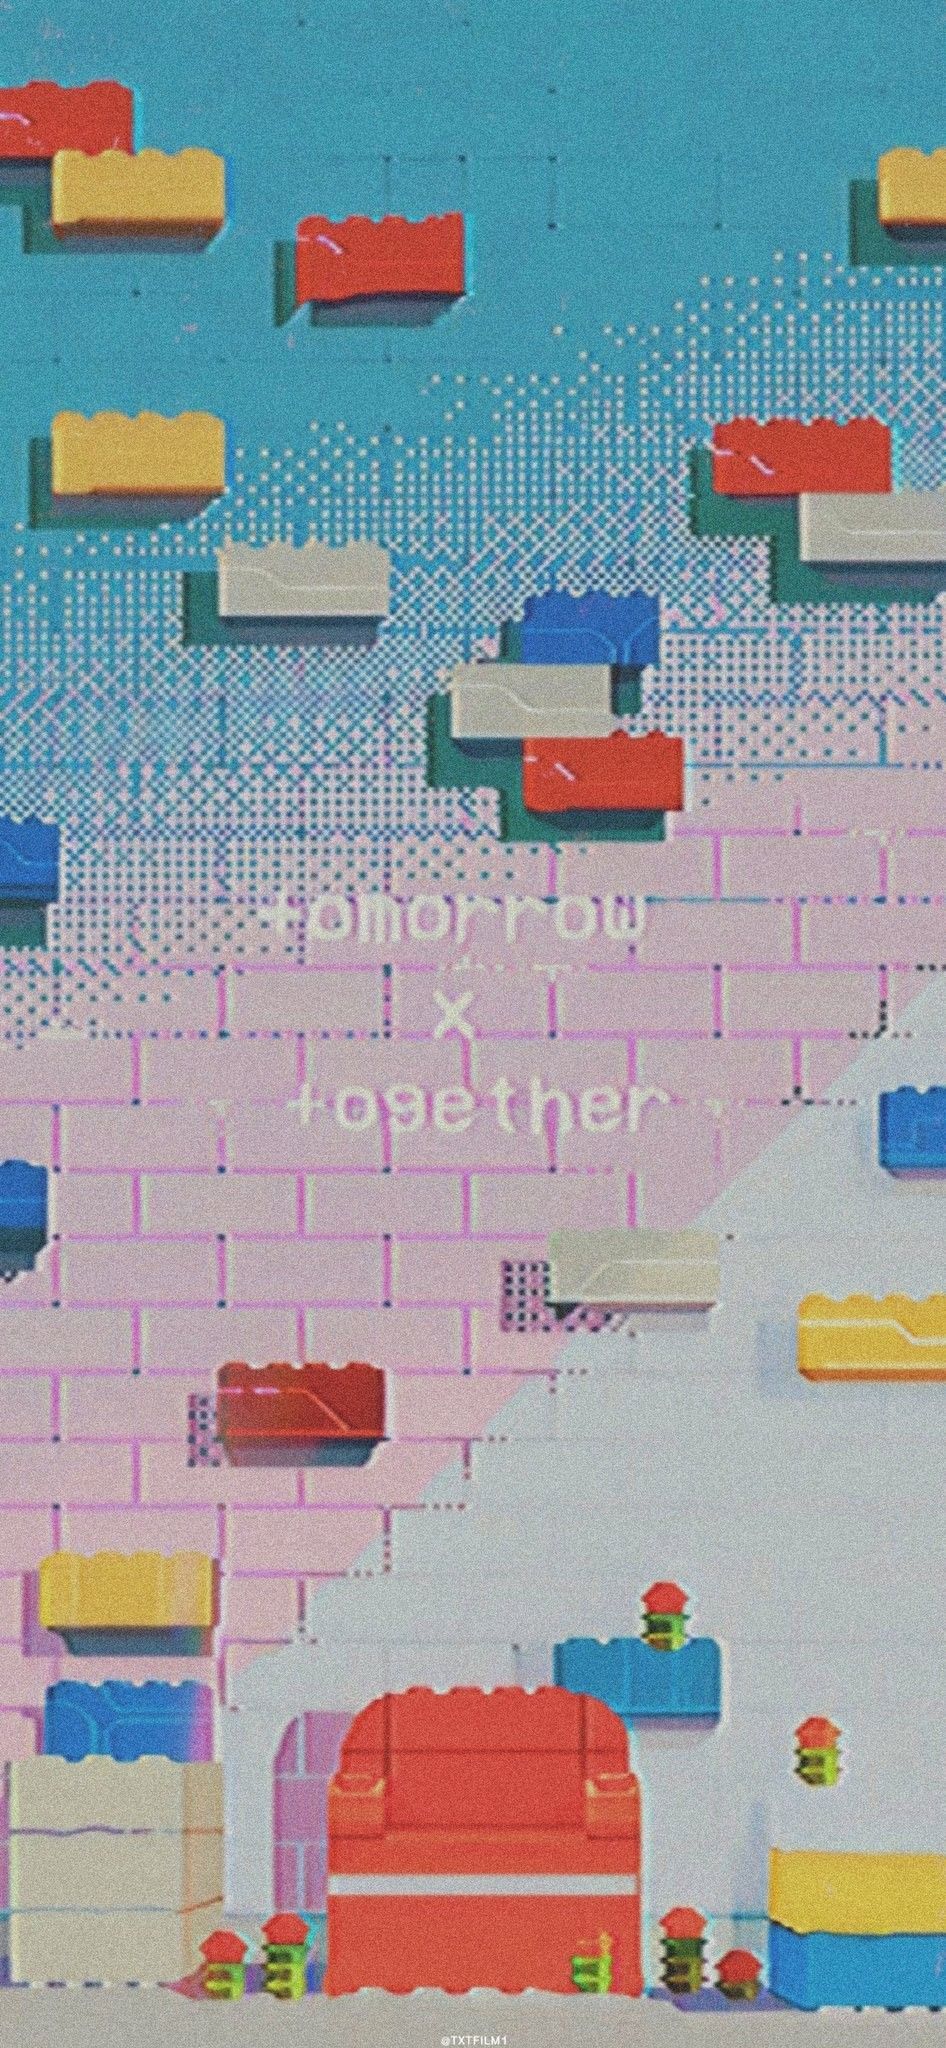 TOMORROW X TOGETHER. WALLPAPERS. Wallpaper, Kids rugs, Txt